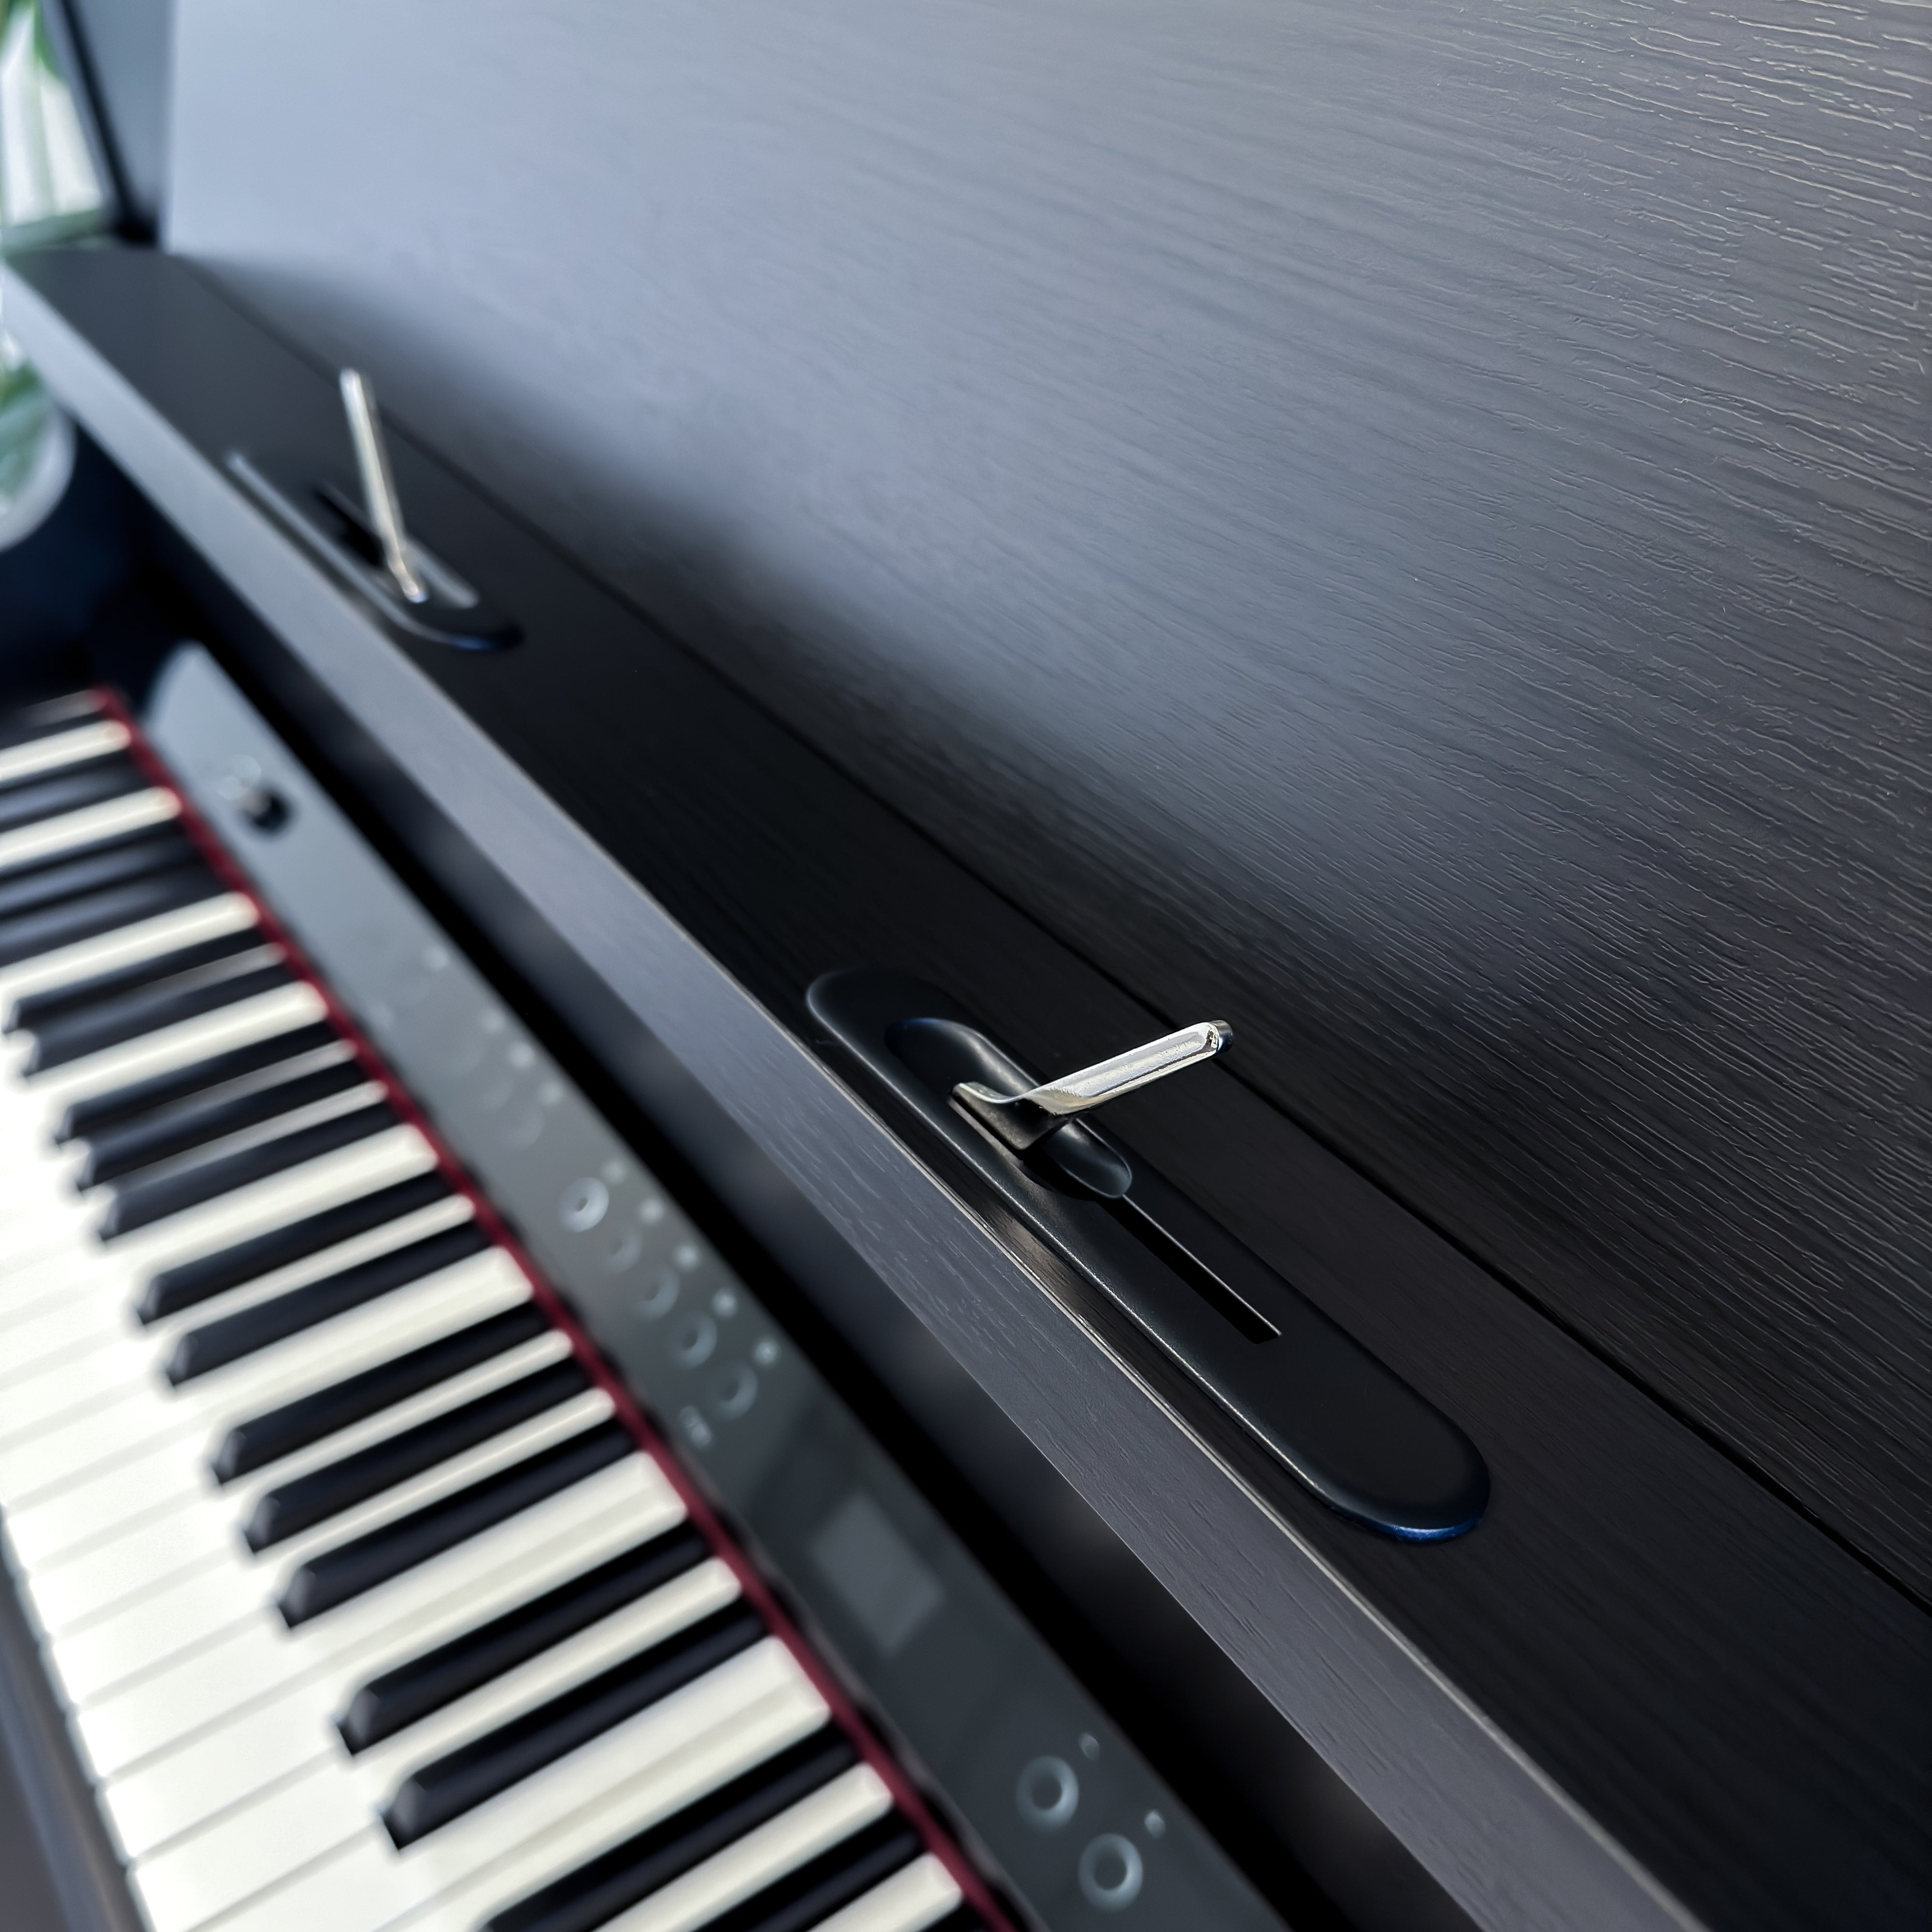 Roland LX-9 Digital Piano with Bench - Charcoal Black - View 19